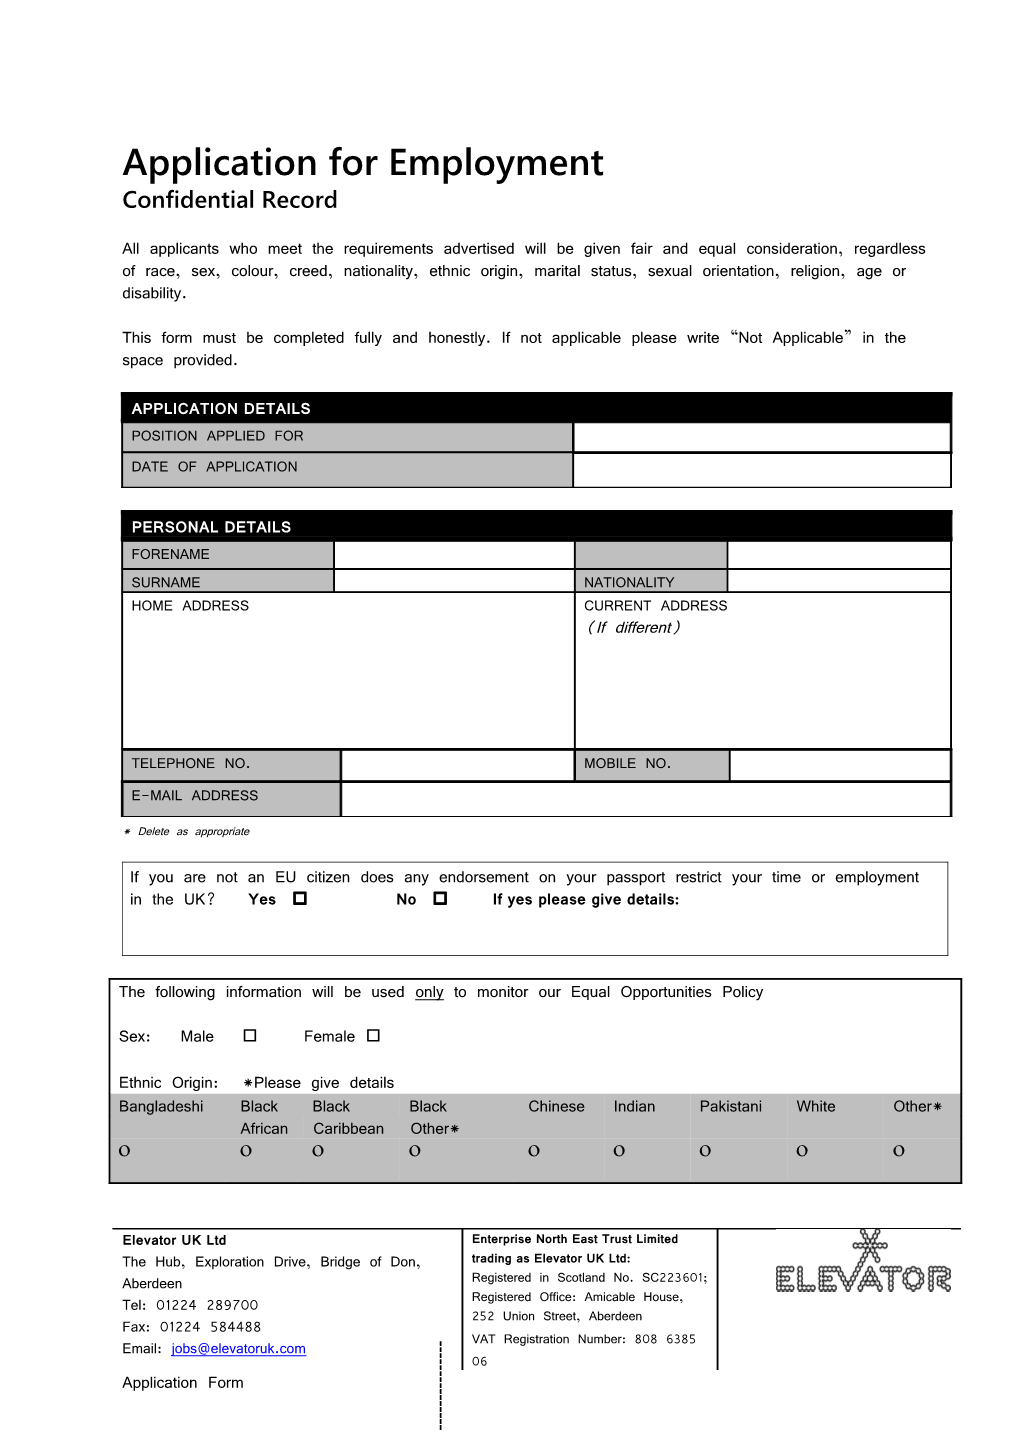 App Form for Employment